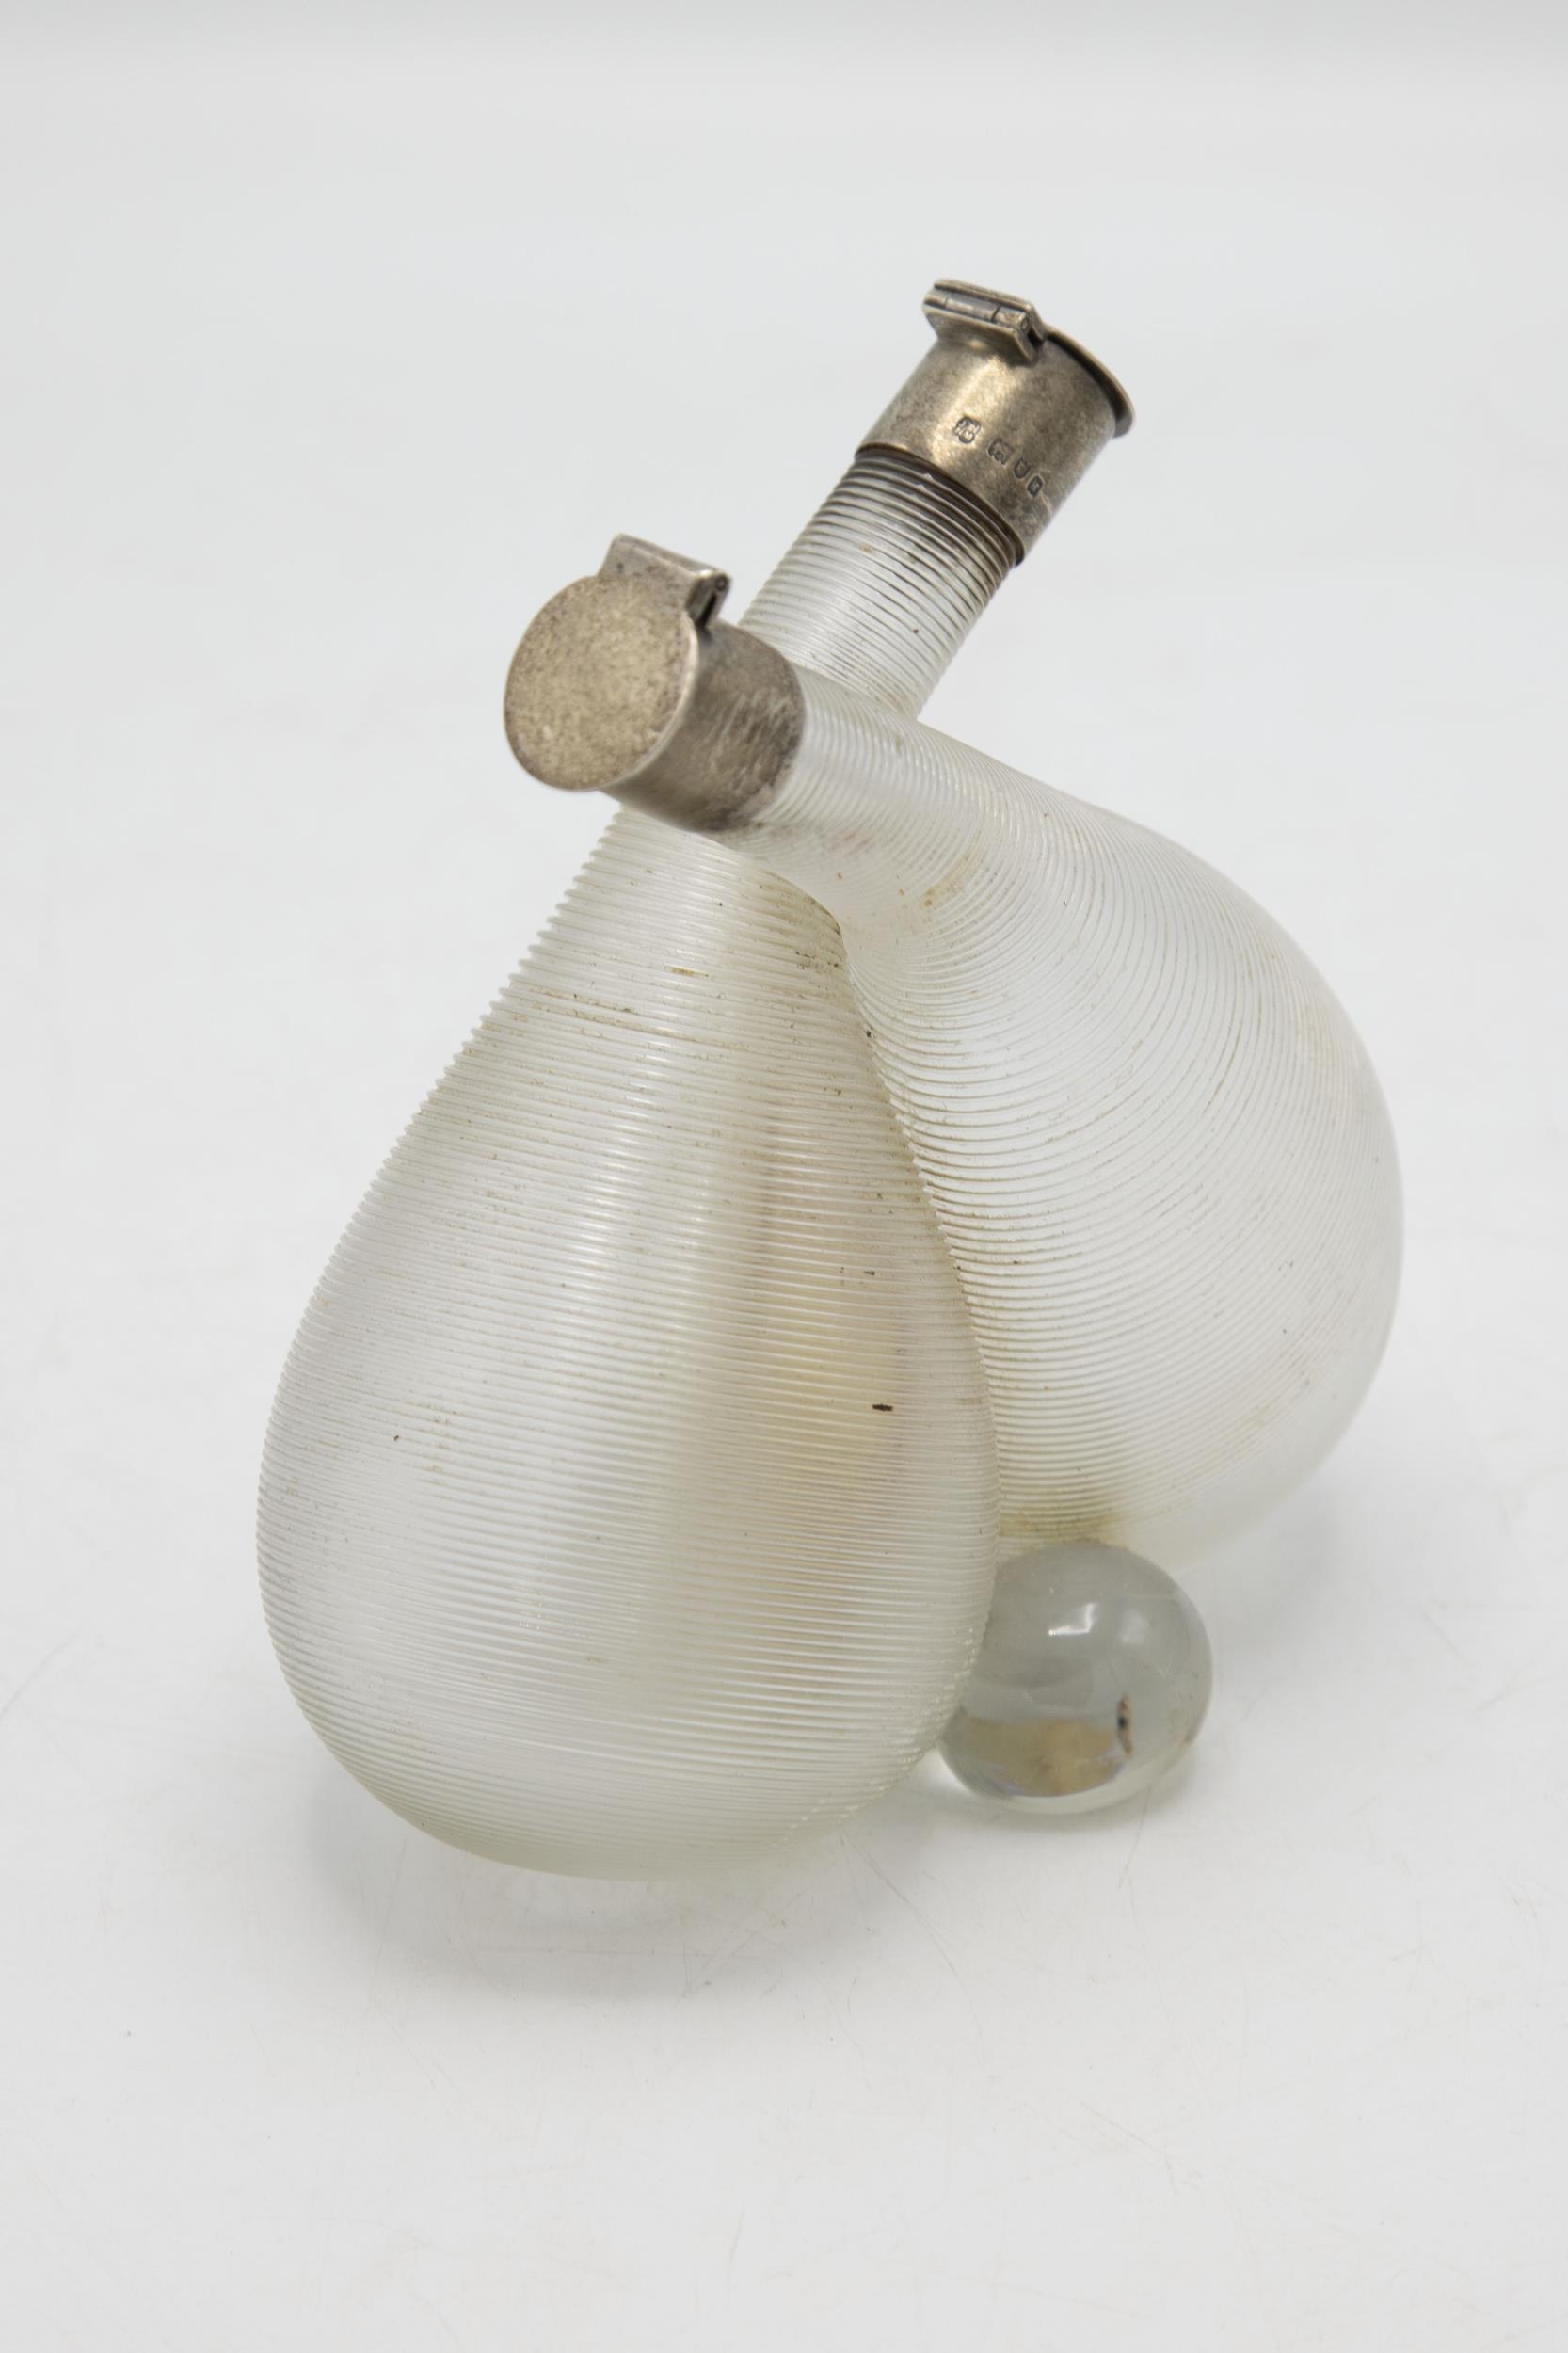 Ribbed glass oil and vinegar bottle with silver top finish, Hukin & Heath, London 1905, H 16cm - Image 3 of 3